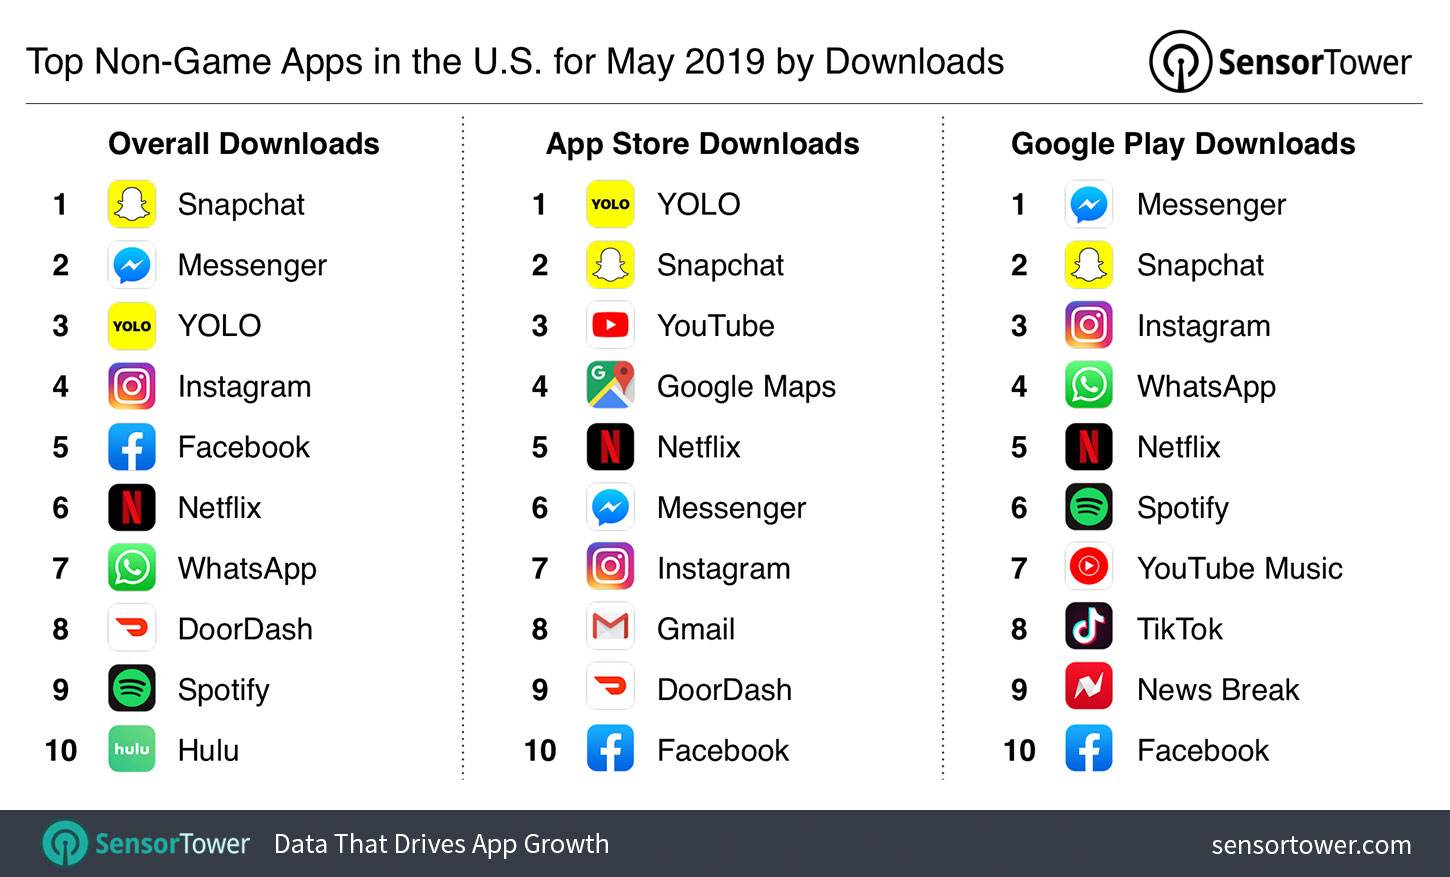 Top Non-Game Apps in the U.S. for May 2019 by Downloads